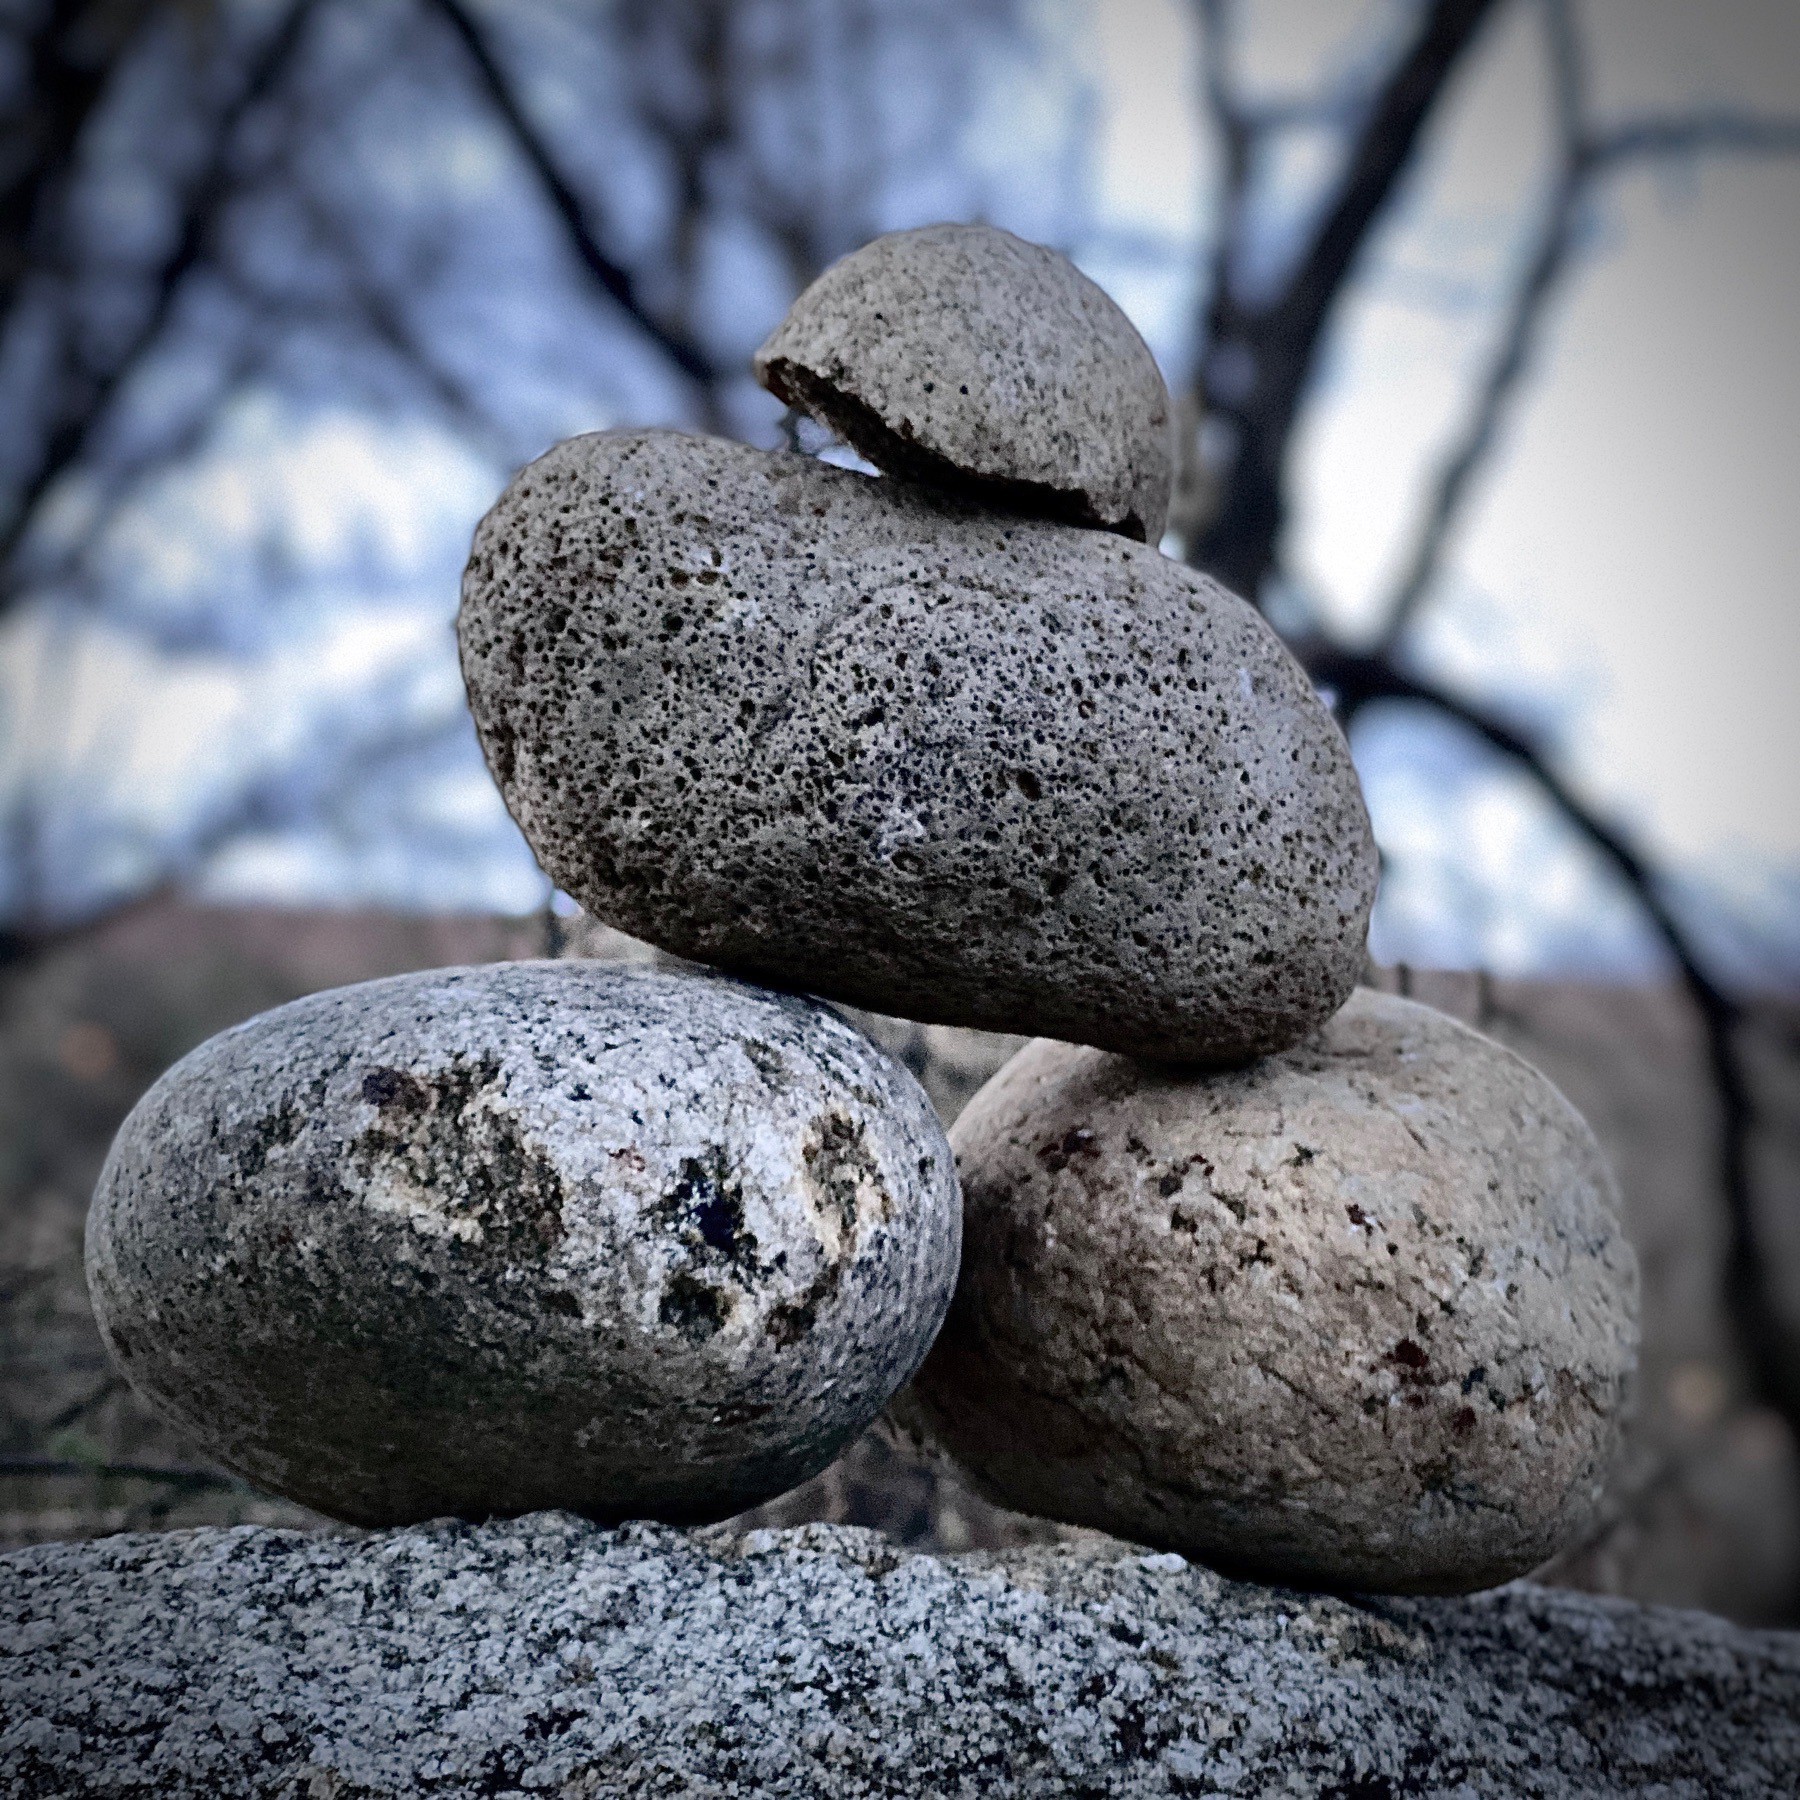 Rounded stones arranged on top of one another.